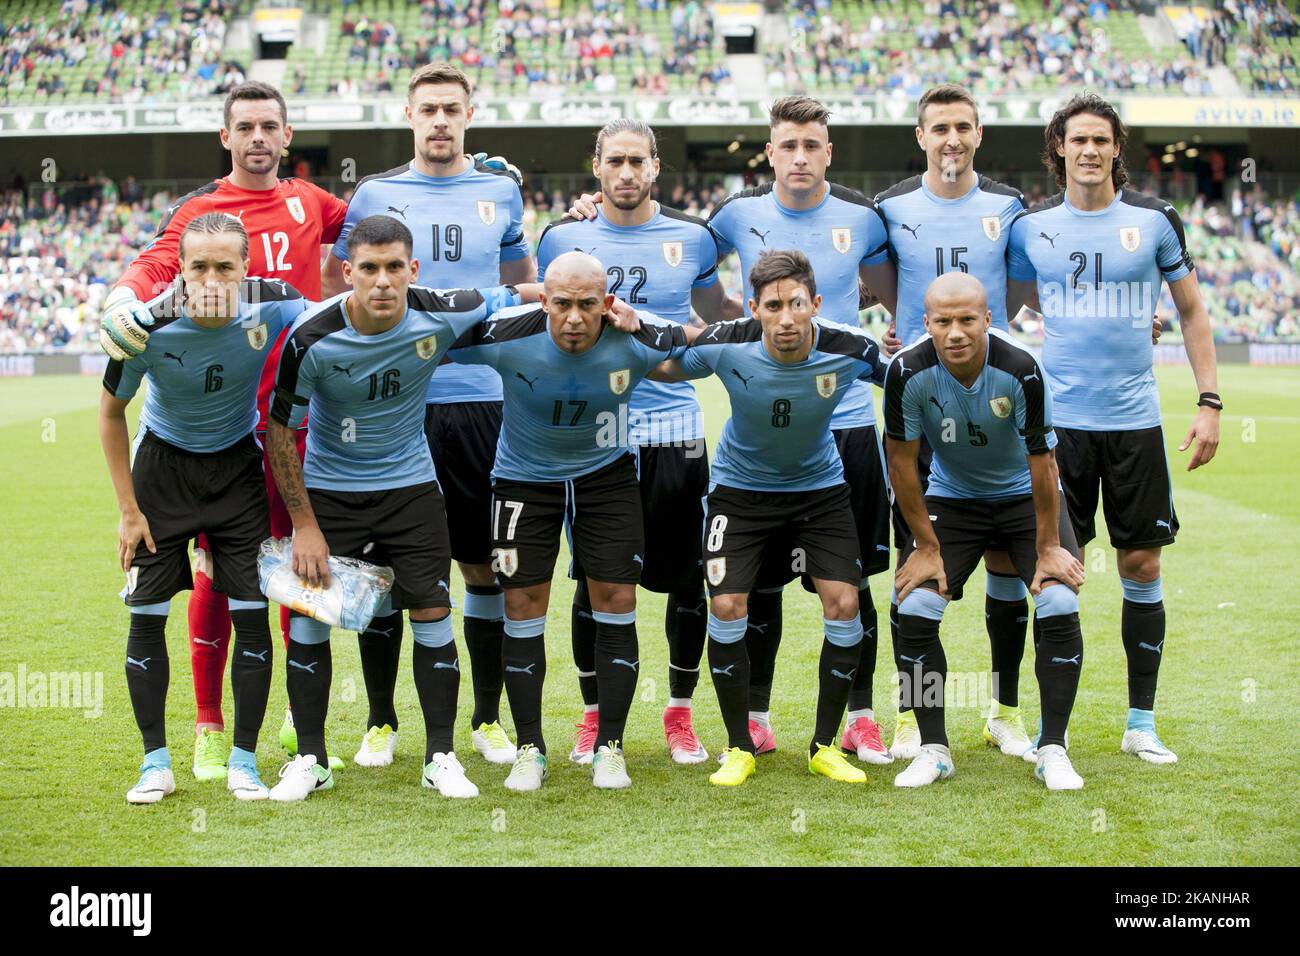 Uruguay national football team poses for photo before the International Friendly match between Republic of Ireland and Uruguay at Aviva Stadium in Dublin, Ireland on June 4, 2017 Republic of Ireland defeats Uruguay 3-1. (Photo by Andrew Surma/NurPhoto) *** Please Use Credit from Credit Field *** Stock Photo